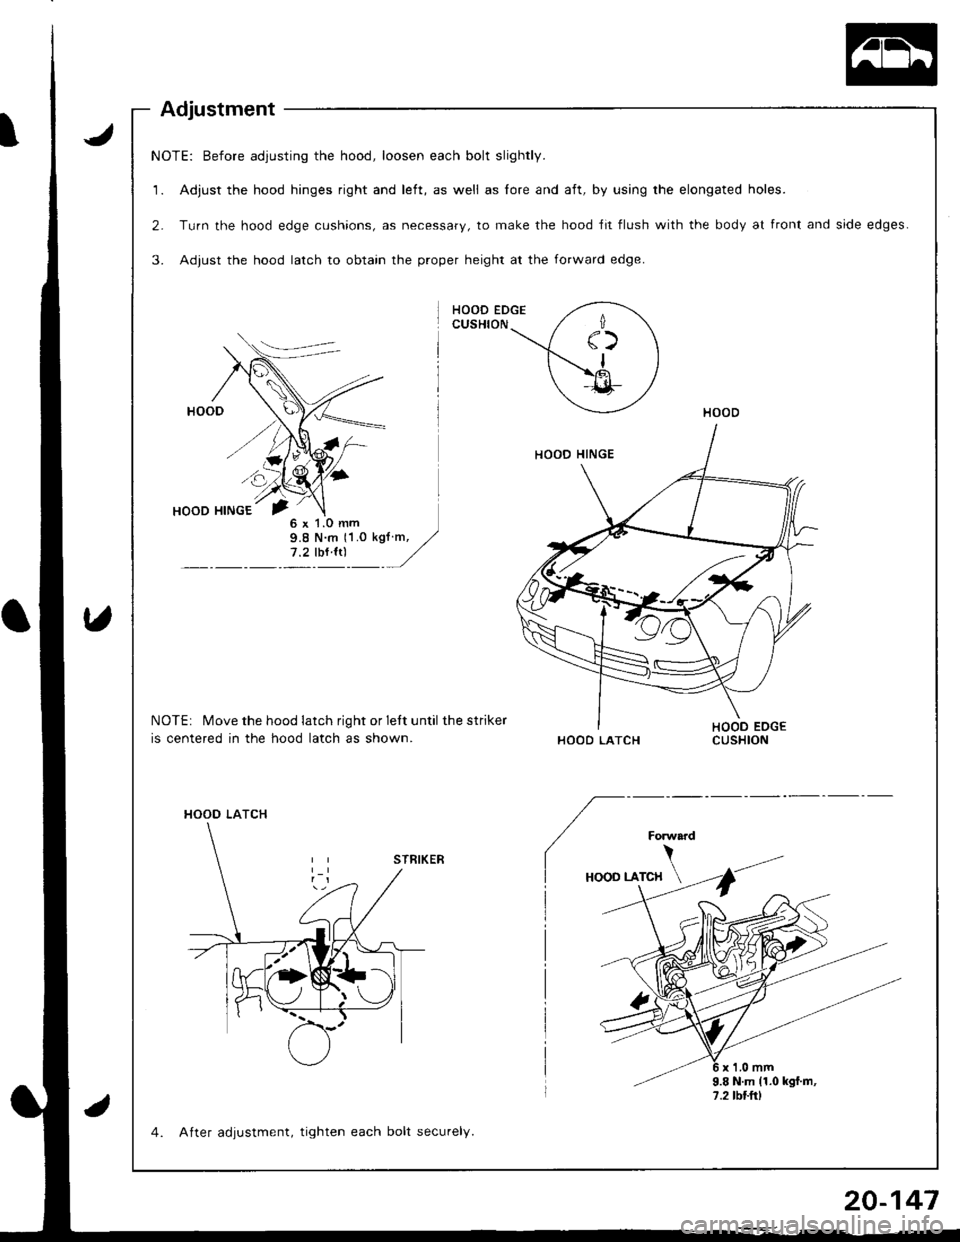 HONDA INTEGRA 1998 4.G Workshop Manual NOTE: Before adjusting the hood, loosen each bolt slightly.
1. Adjust the hood hinges right and left, as well as lore and aft, by using the elongated holes.
2. Turn the hood edge cushions, as necessar